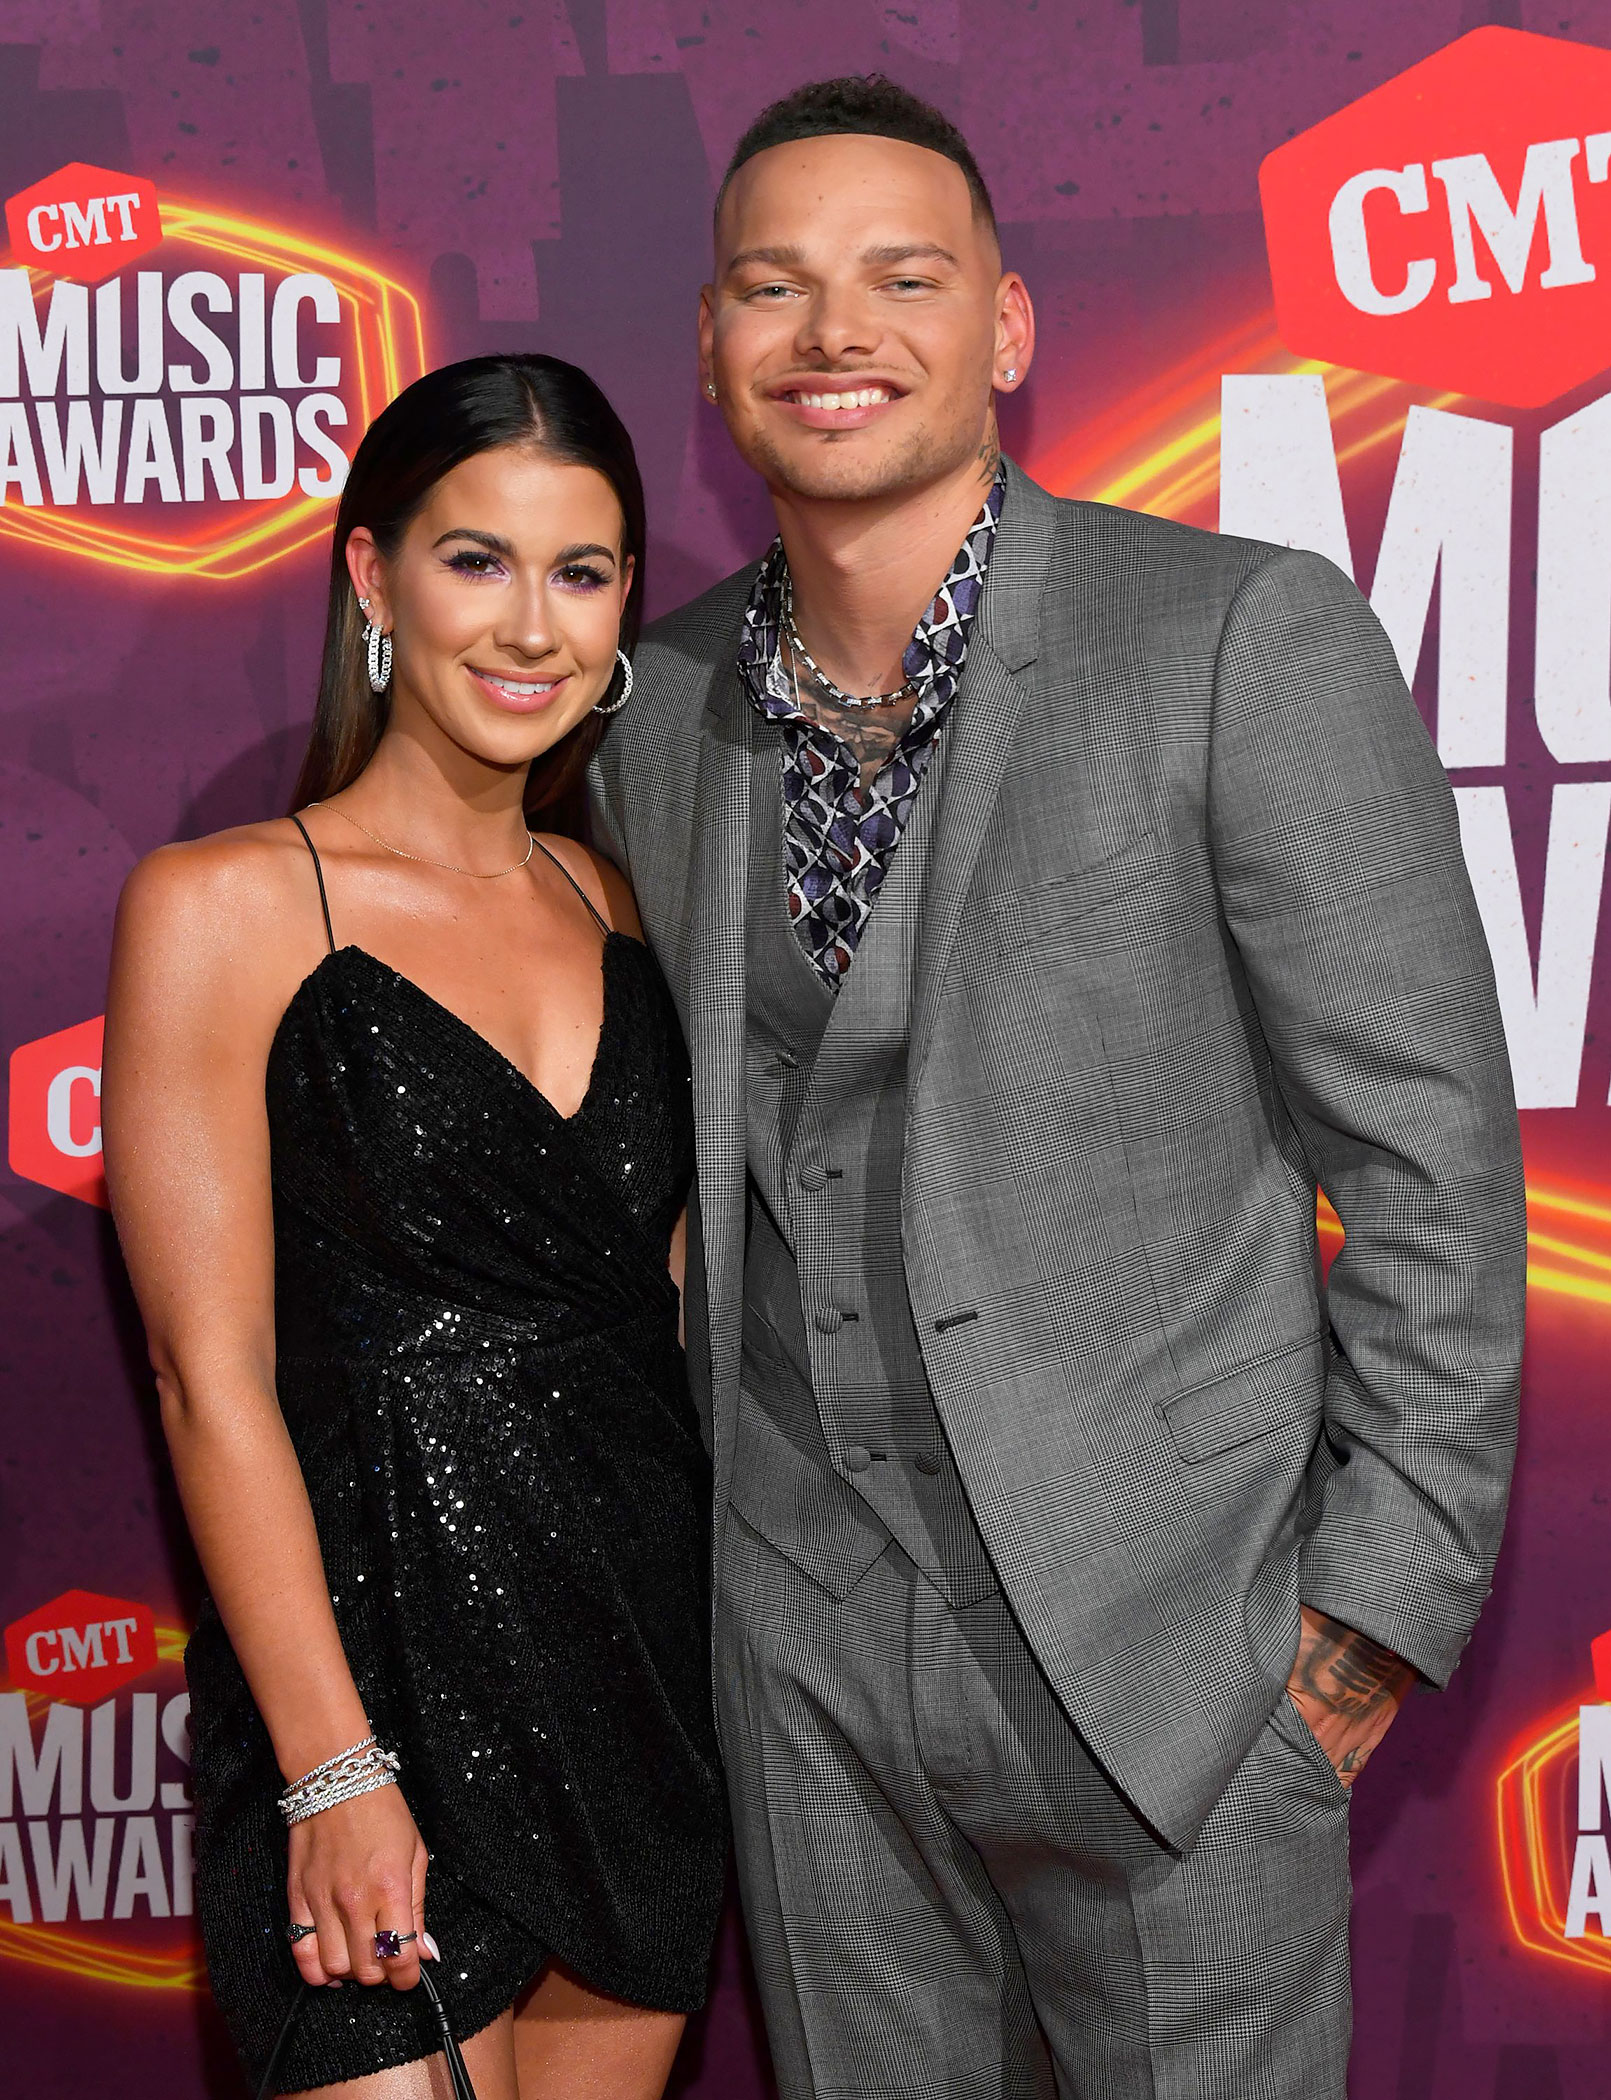 CMT Music Awards 2021 Hottest Country Couples at the Show